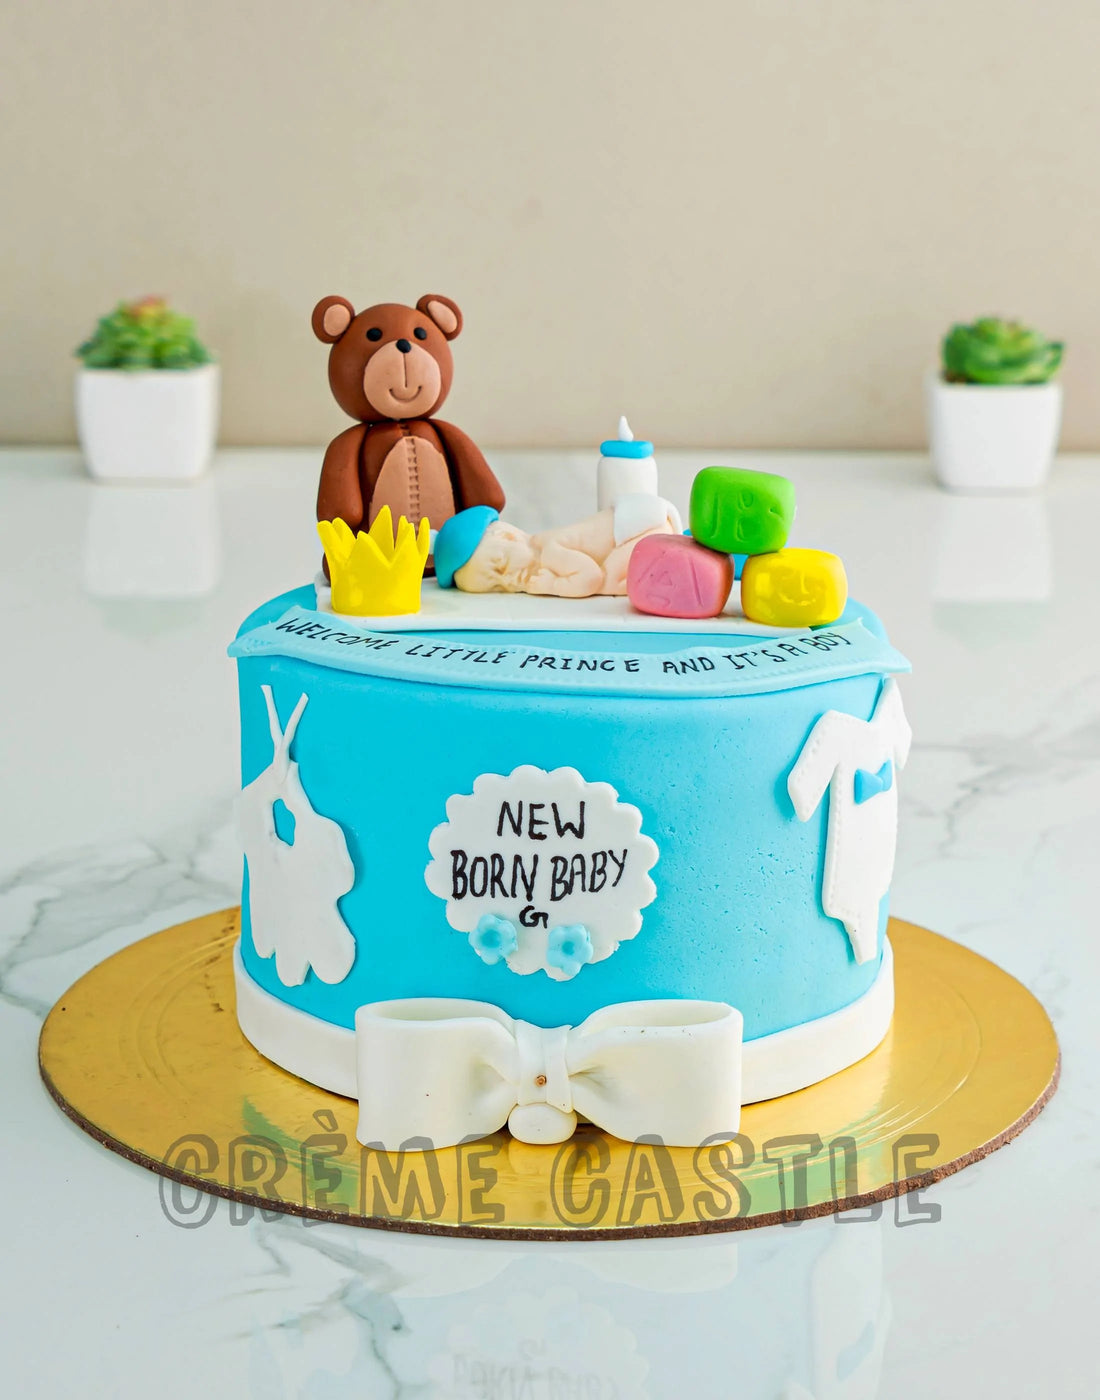 Welcome Baby Cake with Teddy by Creme Castle